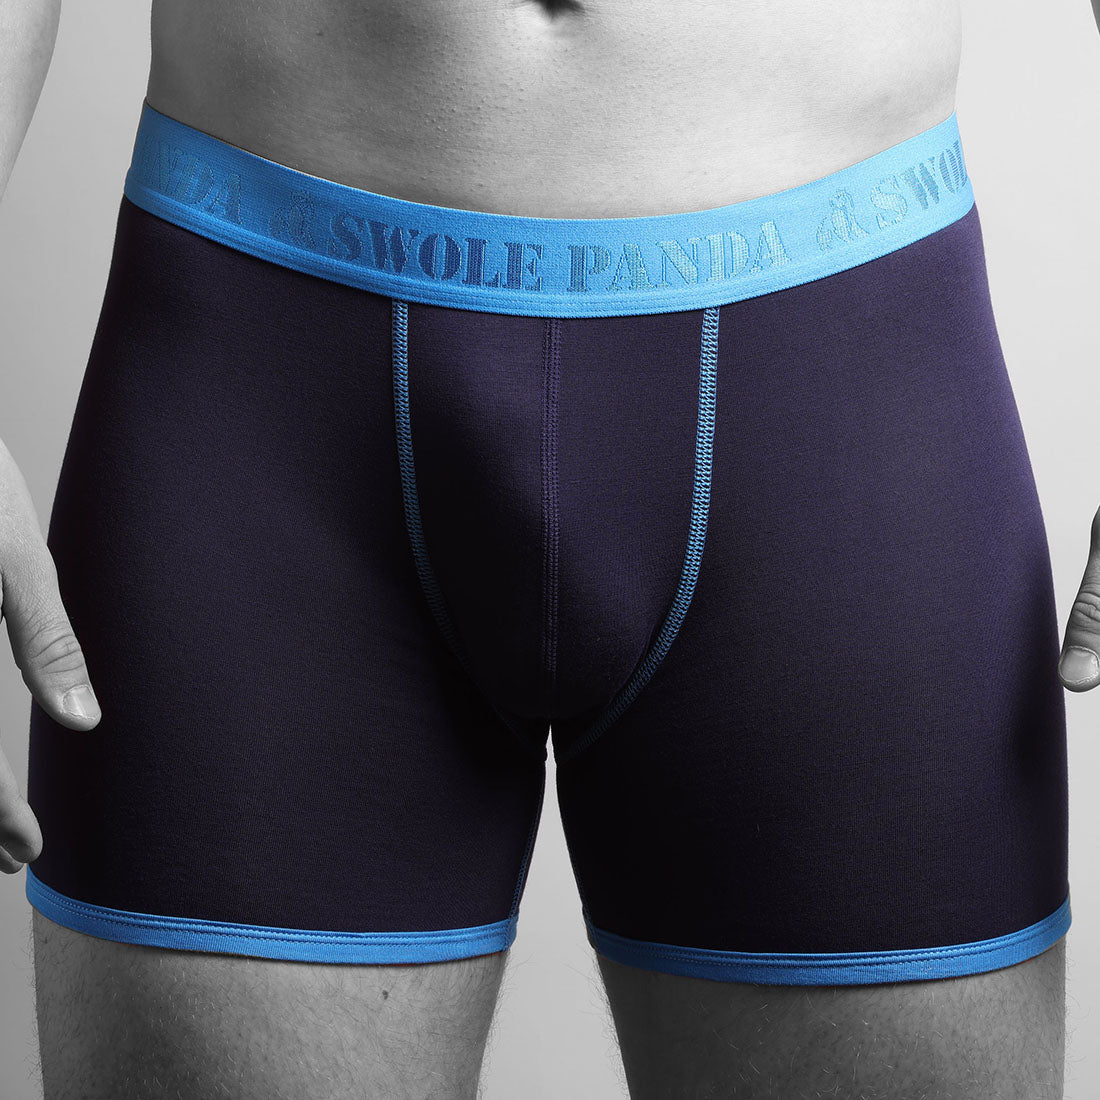 underwear-bamboo-boxers-navy-blue-band-1_9aa55fcb-a65f-4d68-af87-ad7363dfb3b7.jpg